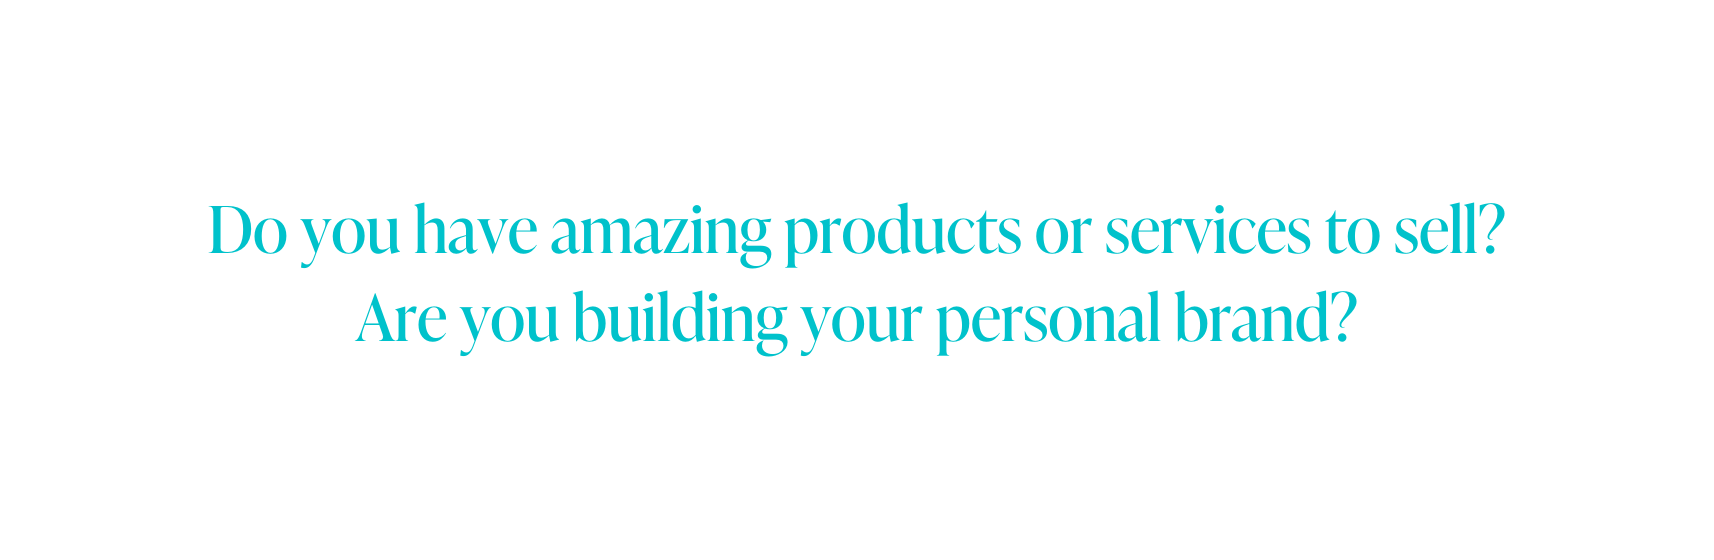 Do you have amazing products or services to sell Are you building your personal brand